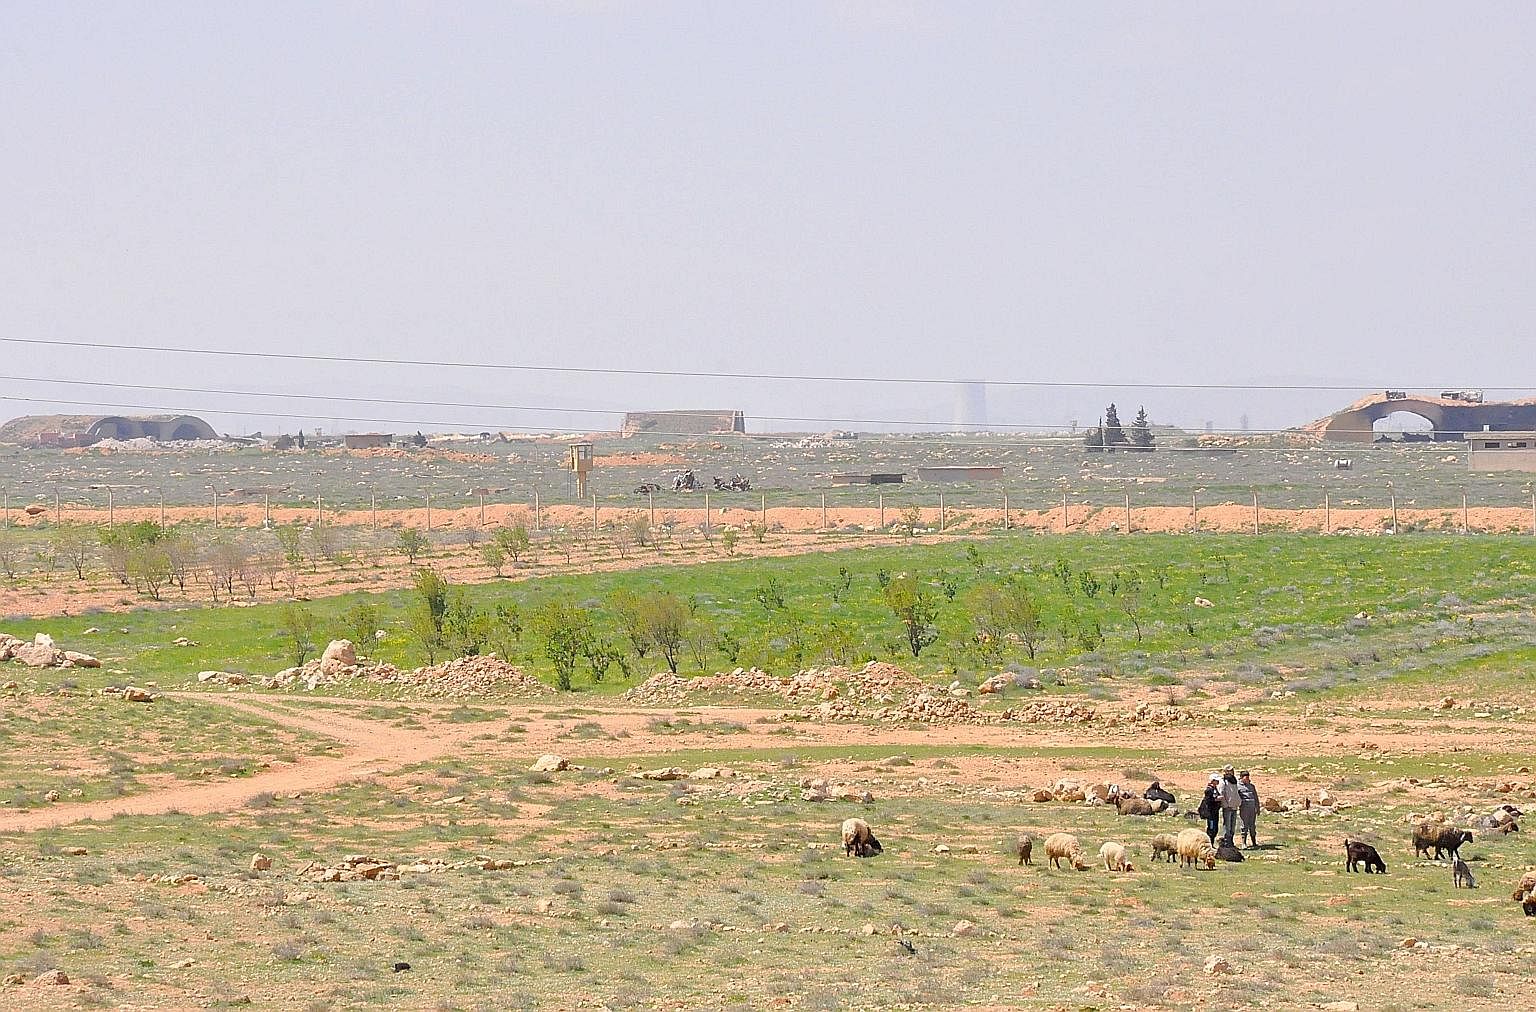 Syrian shepherds near the damaged Shayrat airfield, the Syrian government military base targeted last Thursday by US Tomahawk cruise missiles.